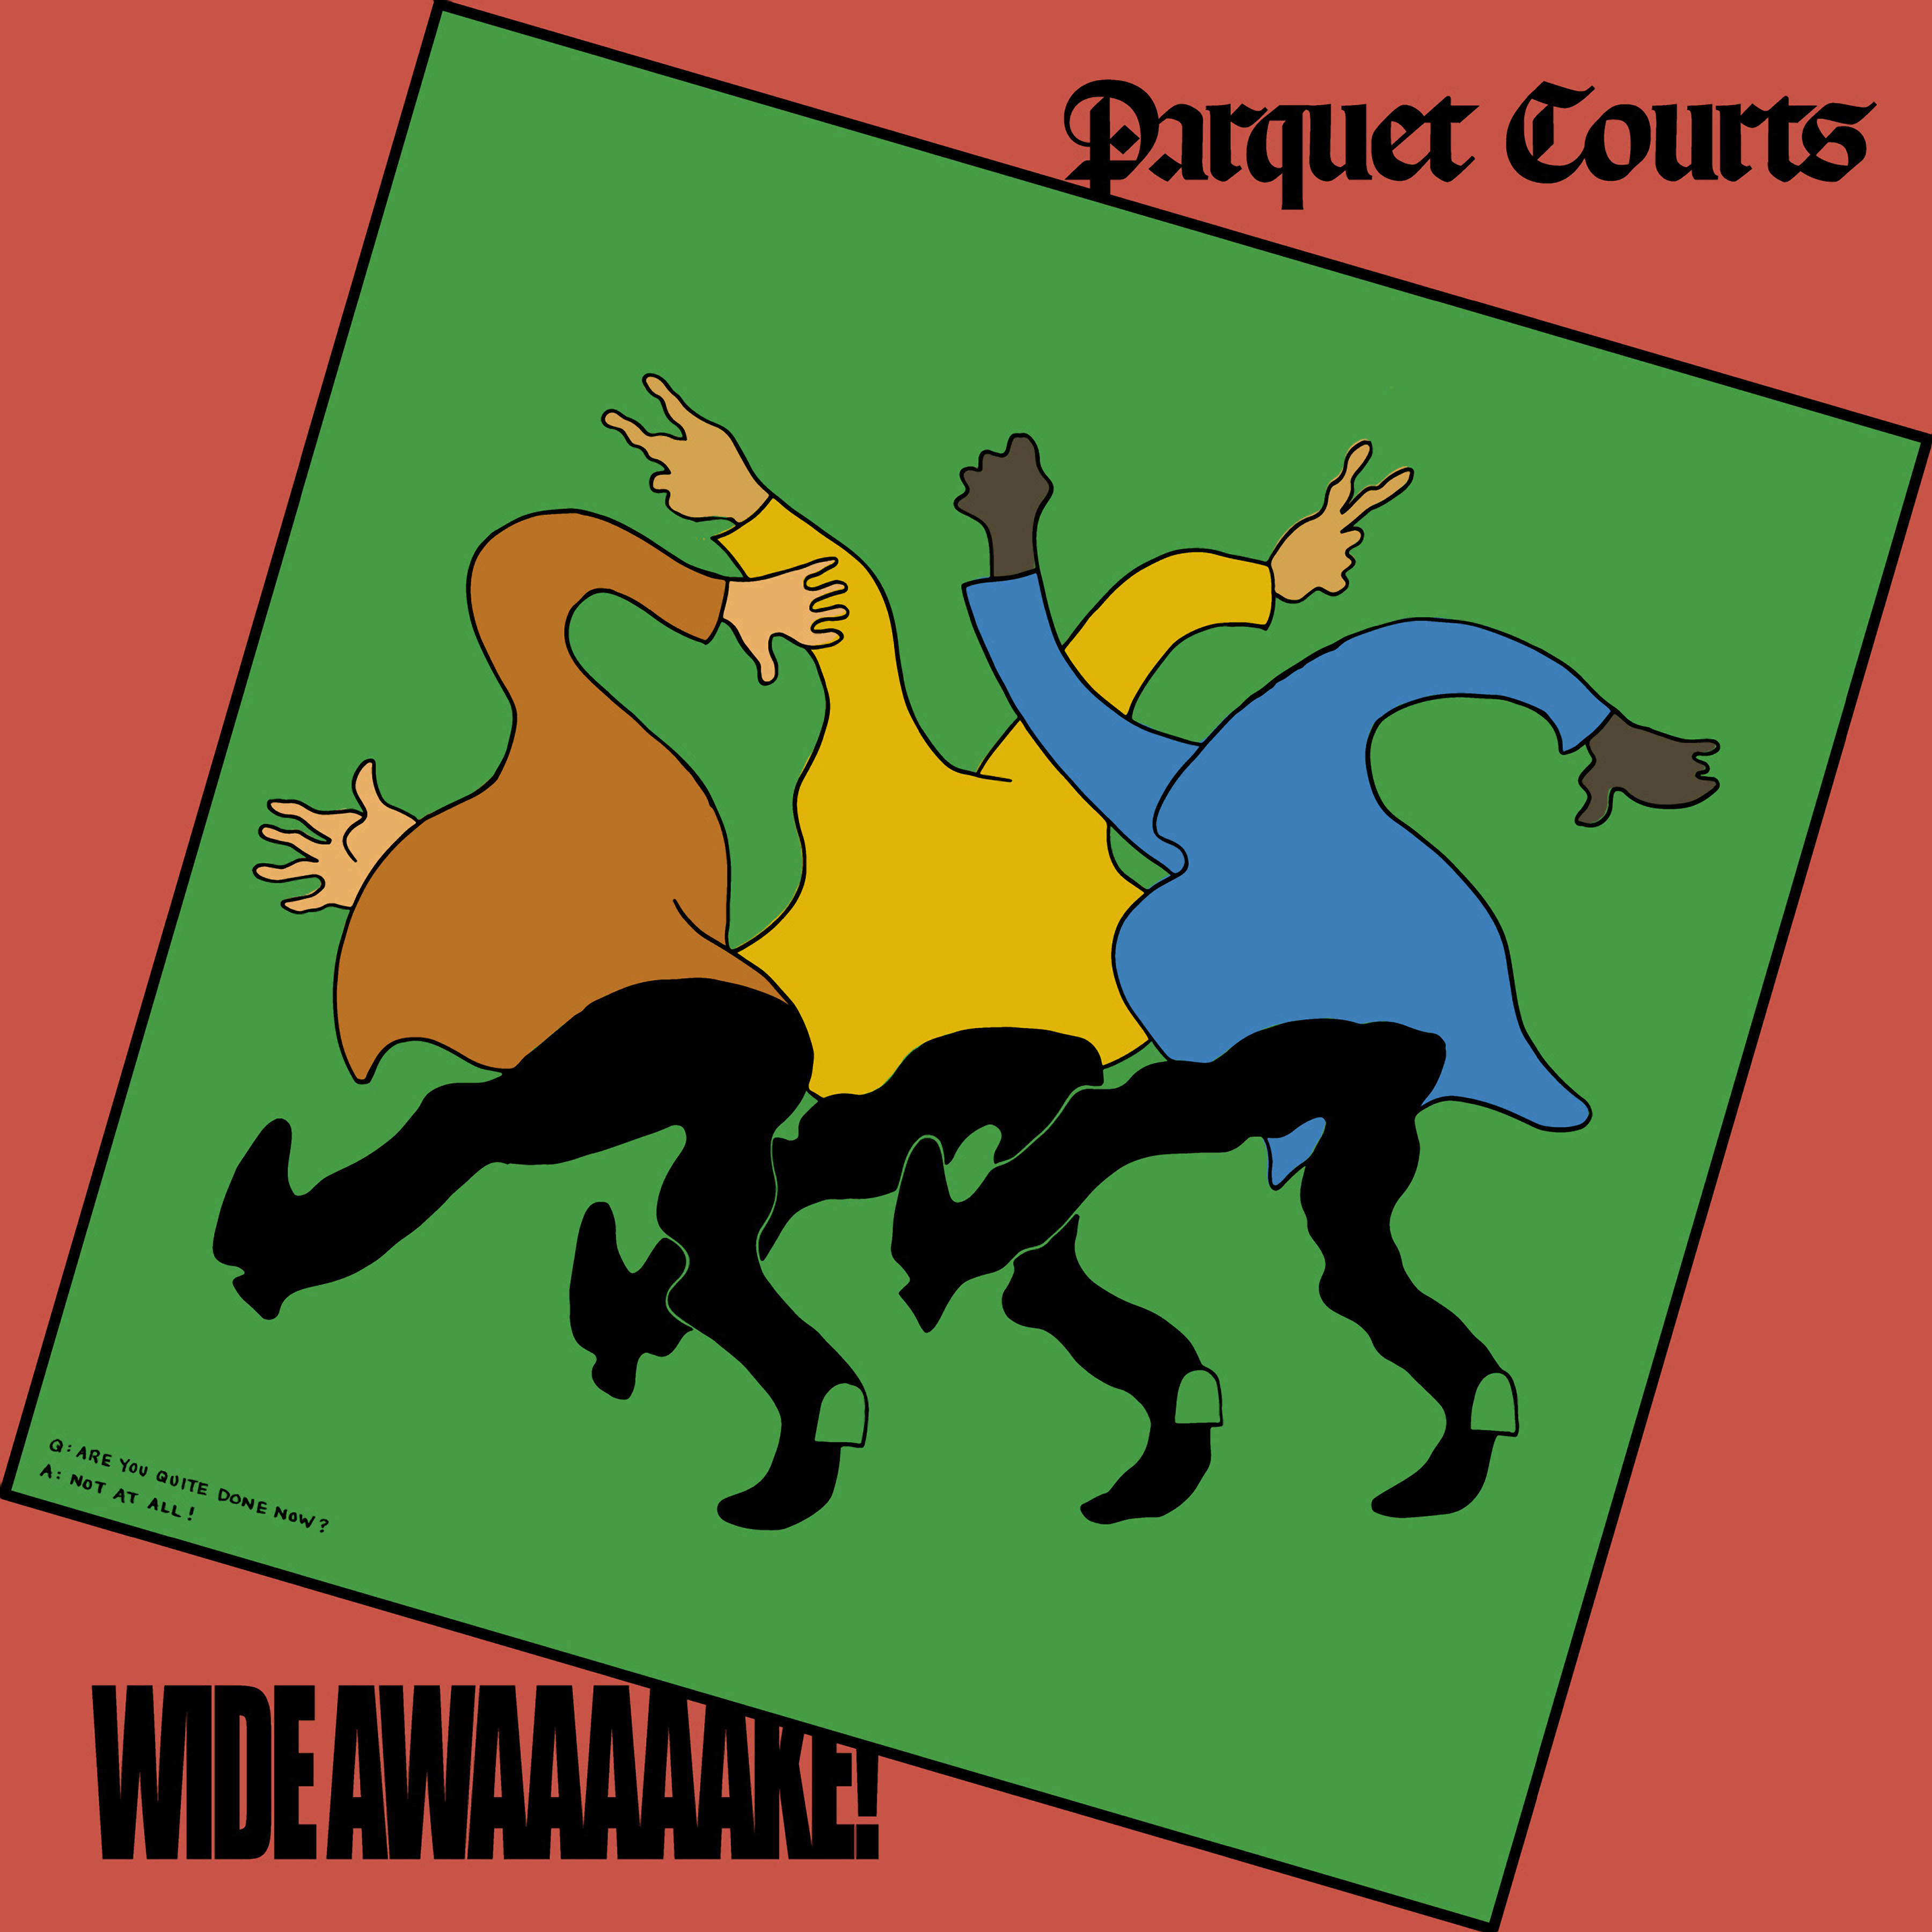 Parquet Courts Announce New Album <i>Wide Awake!</i>, Release “Almost Had to Start a Fight/In and Out of Patience”” title=”RT001_Parquet_Courts_Wide_Awake-1519311286″ data-original-id=”279517″ data-adjusted-id=”279517″ class=”sm_size_full_width sm_alignment_center ” data-image-source=”free_stock” /></p>
<p><strong>Parquet Courts, <em>Wide Awake! </em>track list<br />
</strong>1. “Total Football”<br />
2. “Violence”<br />
3. “Before the Water Gets Too High”<br />
4. “Mardi Gras Beads”<br />
5. “Almost Had to Start a Fight/In and Out of Patience”<br />
6. “Freebird II”<br />
7. “Normalization”<br />
8. “Back to Earth”<br />
9. “Wide Awake”<br />
10. “NYC Observation”<br />
11. “Extinction”<br />
12. “Death Will Bring Change”<br />
13. “Tenderness”</p>
</p></p></p><p>To see our running list of the top 100 greatest rock stars of all time, <a href=